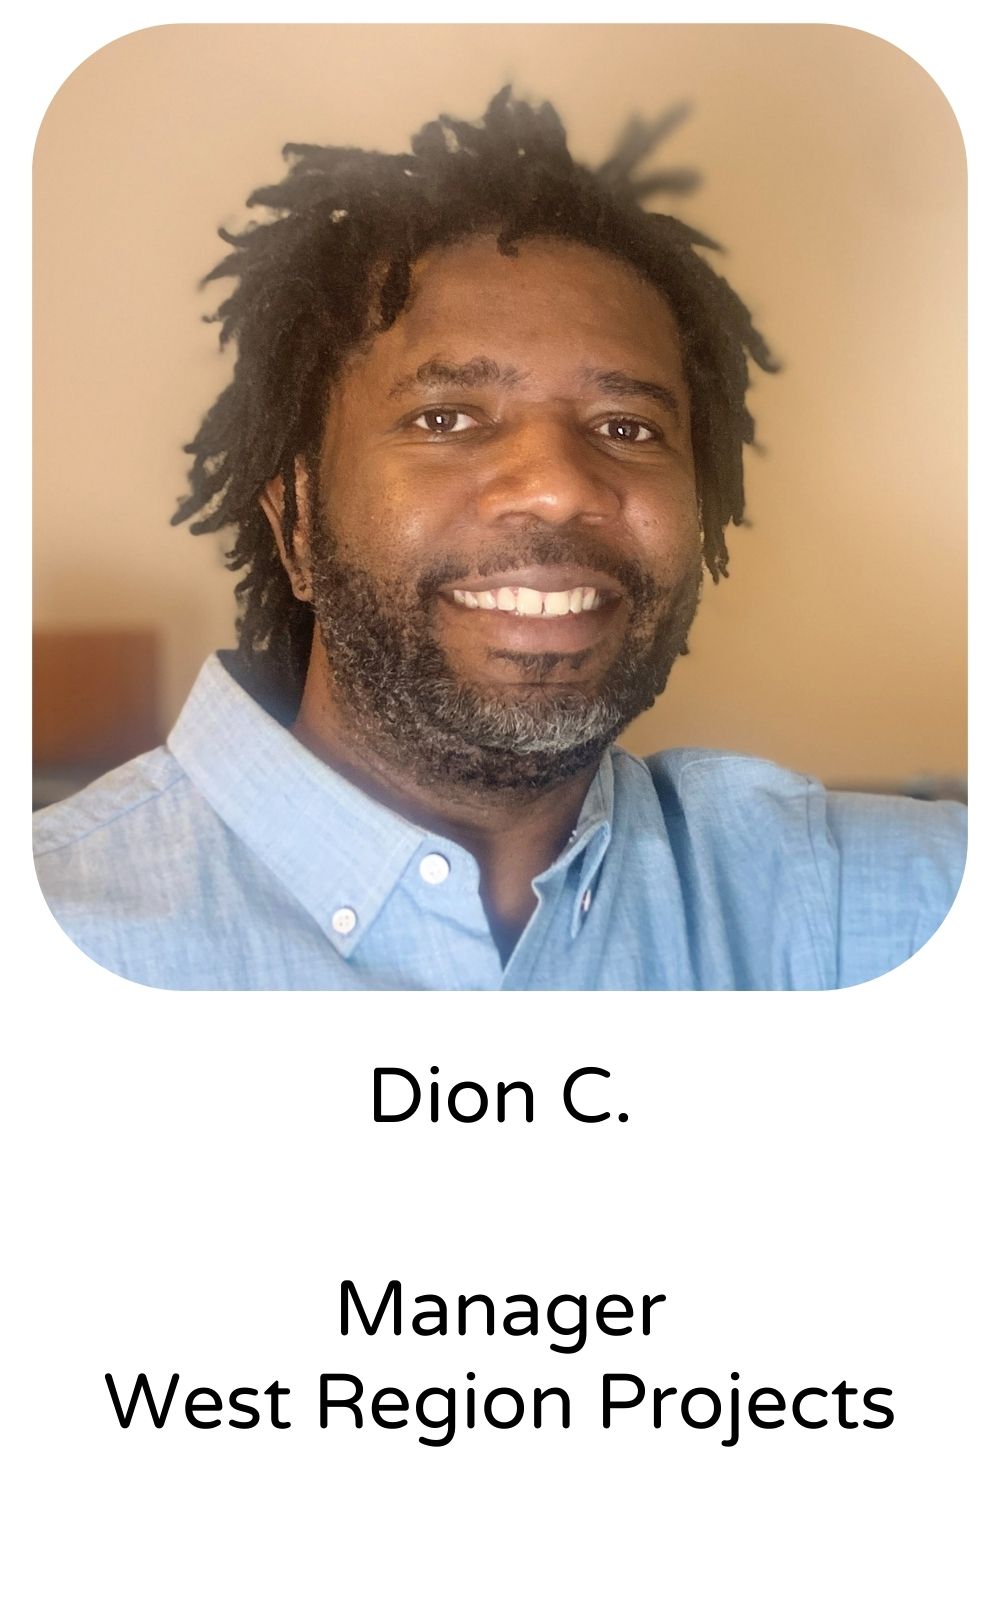 Dion C, Mananger, West Region Projects